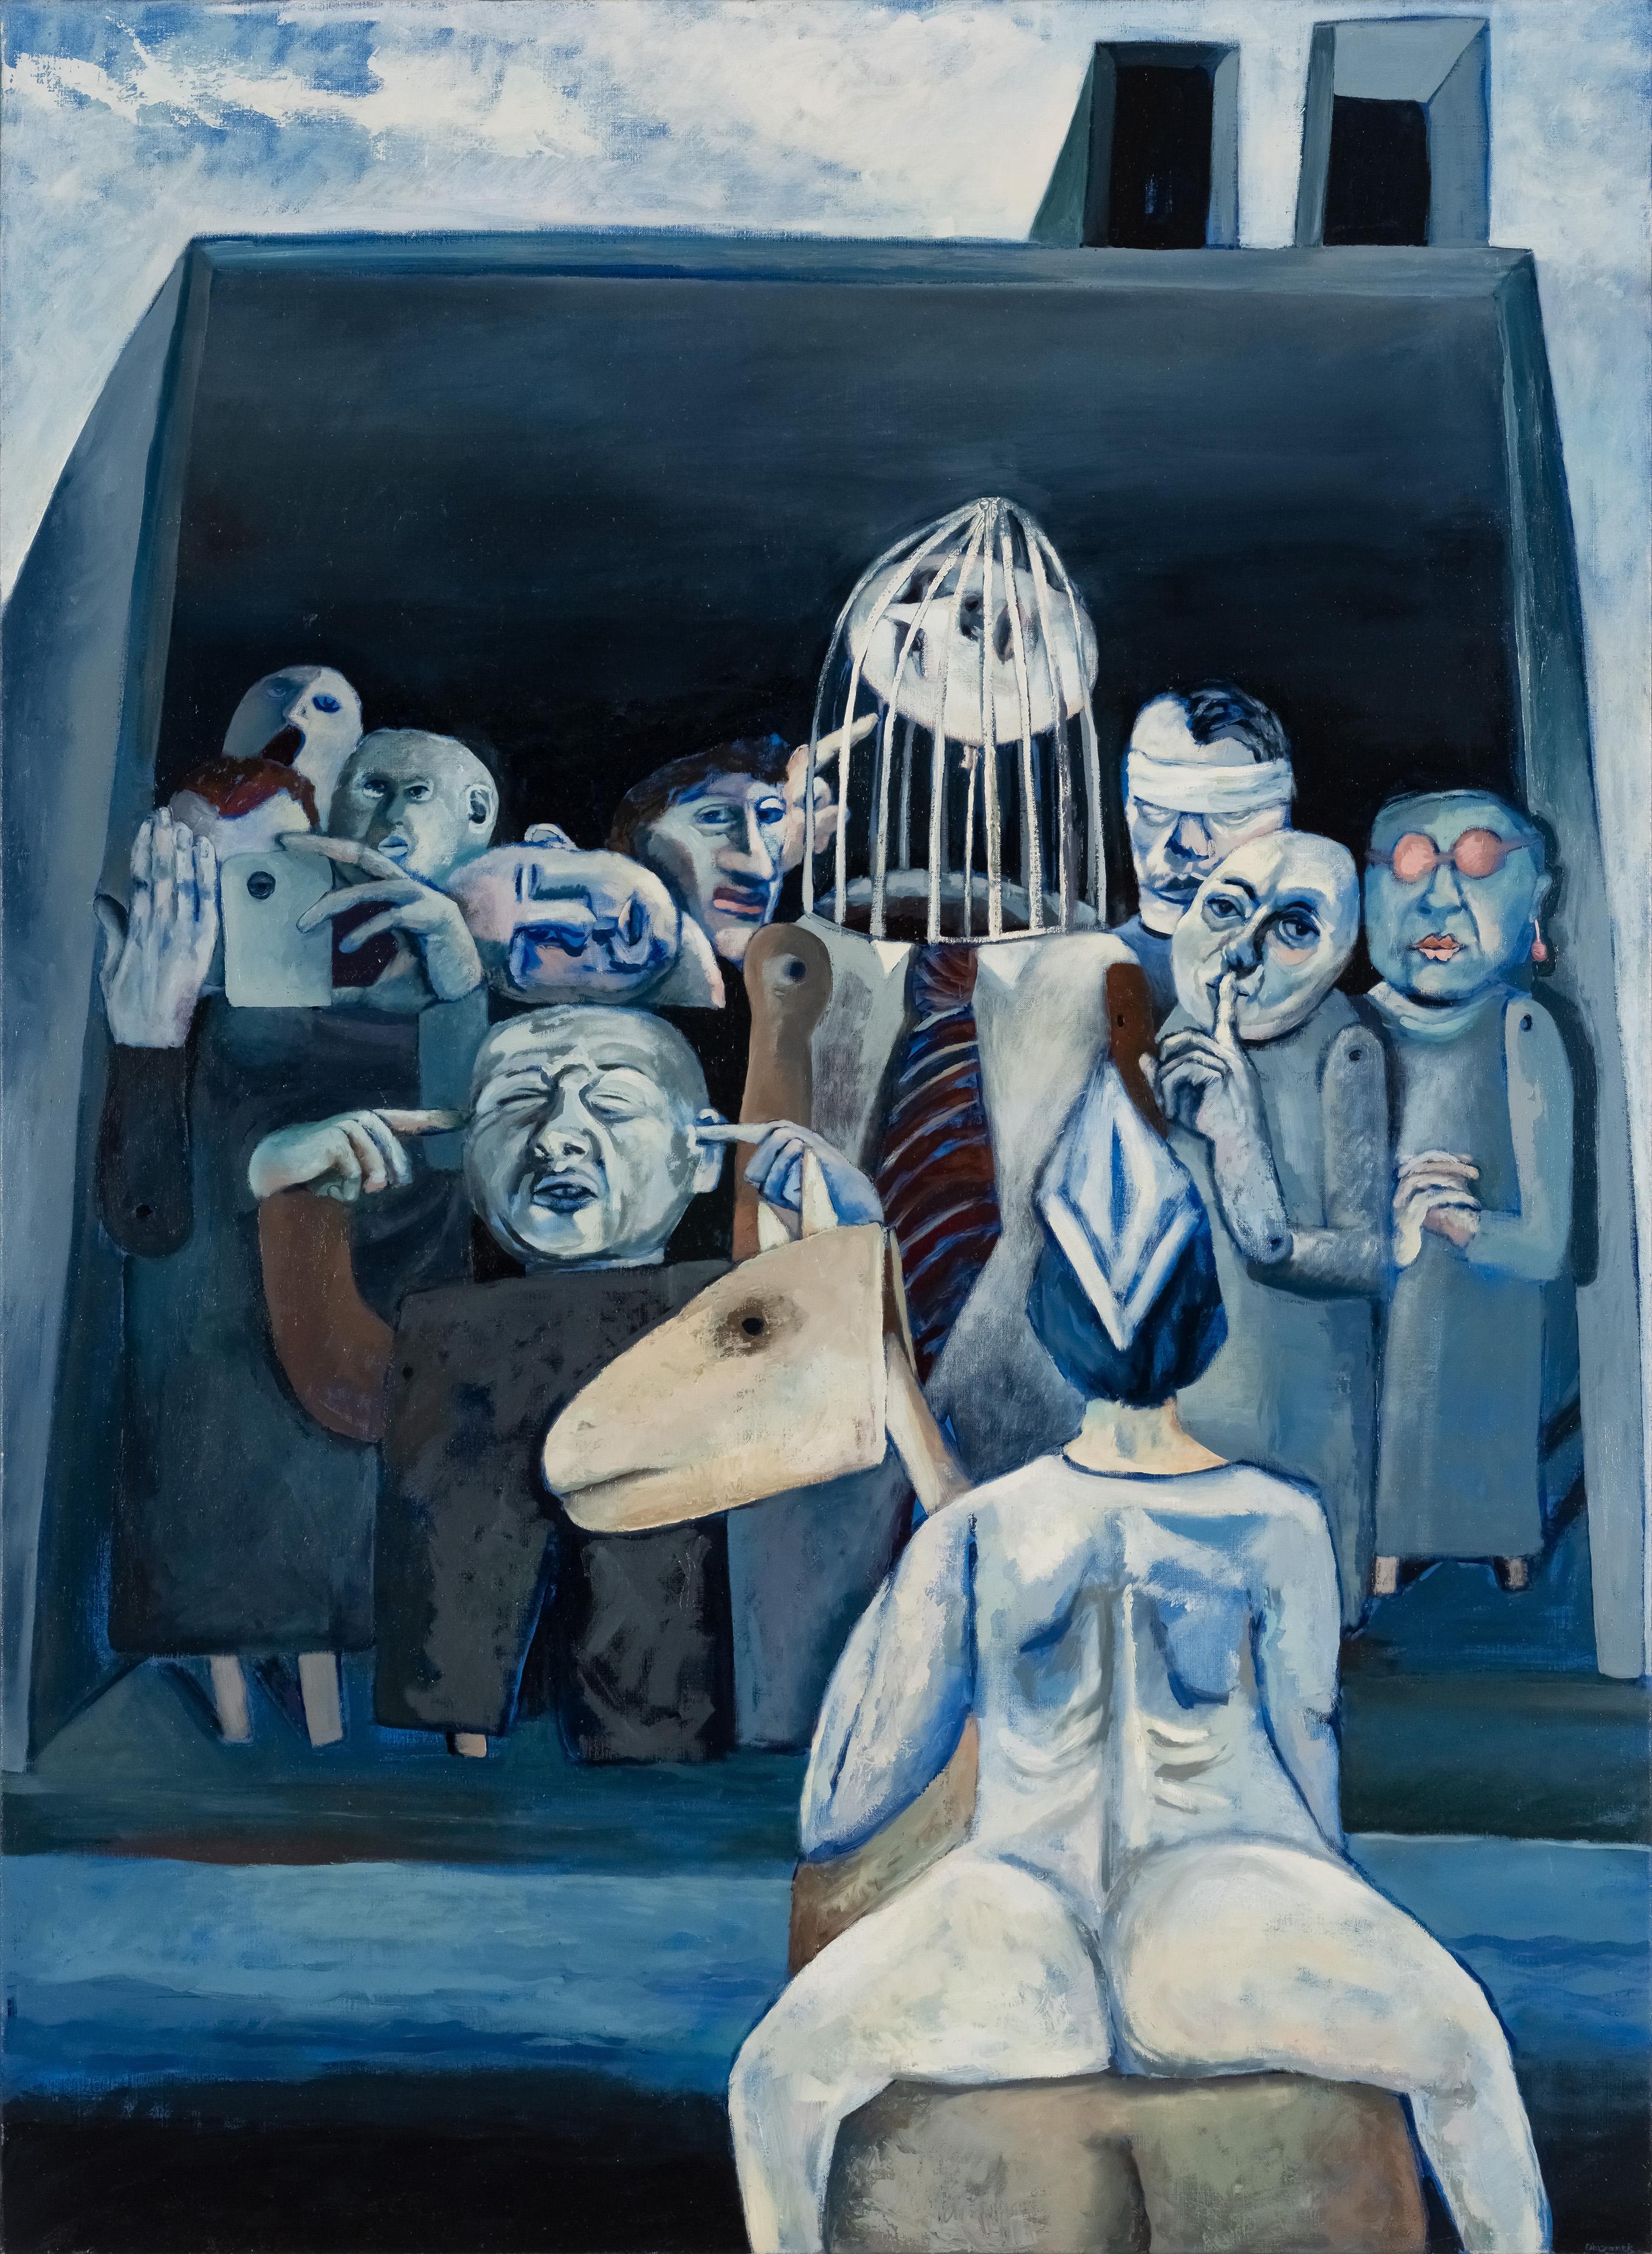 Welcoming Party at the 3rd Entrance. Tribute to George Baldessin. - Painting by Alexandra Obarzanek